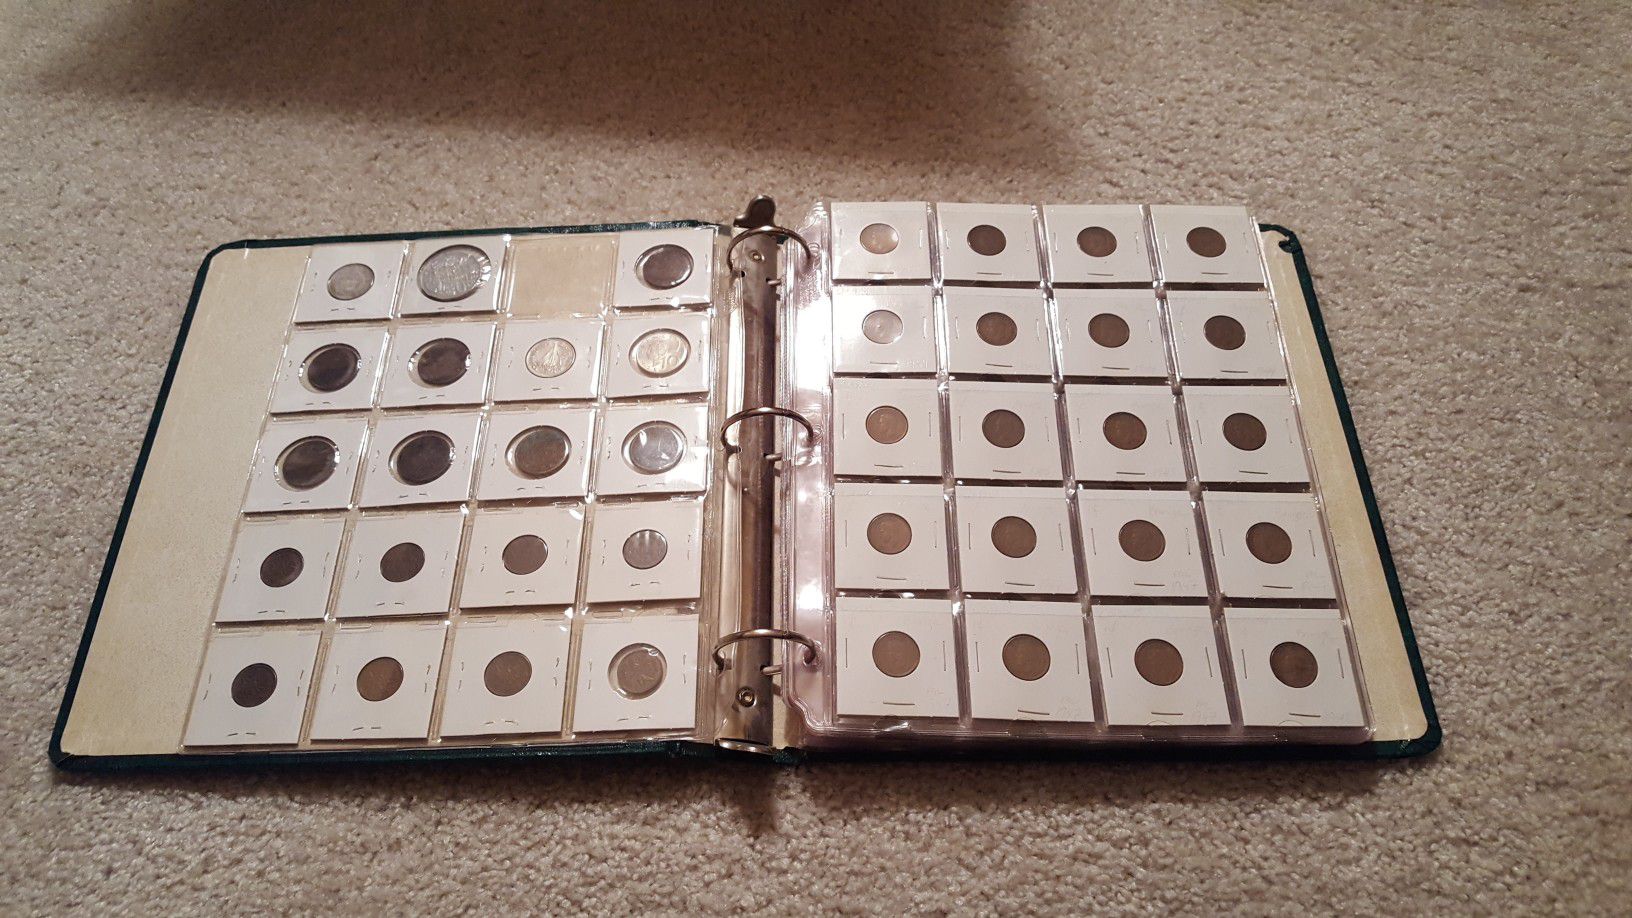 Foreign Coin Collection - About 180 Nice Coins